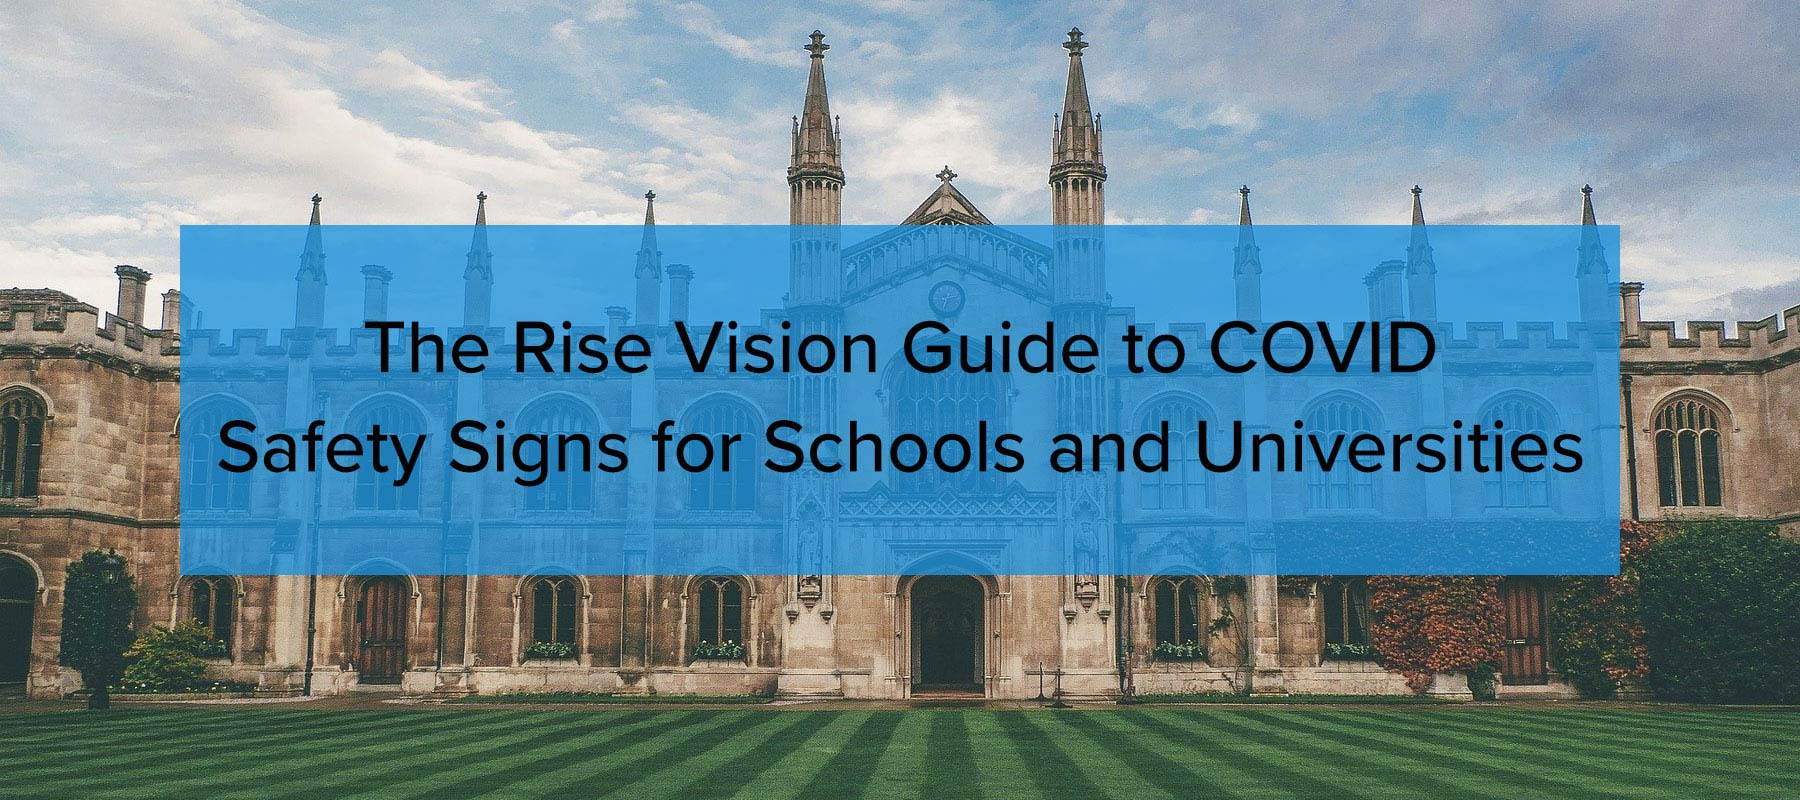 Guide to COVID Safety Signs for Schools and Universities